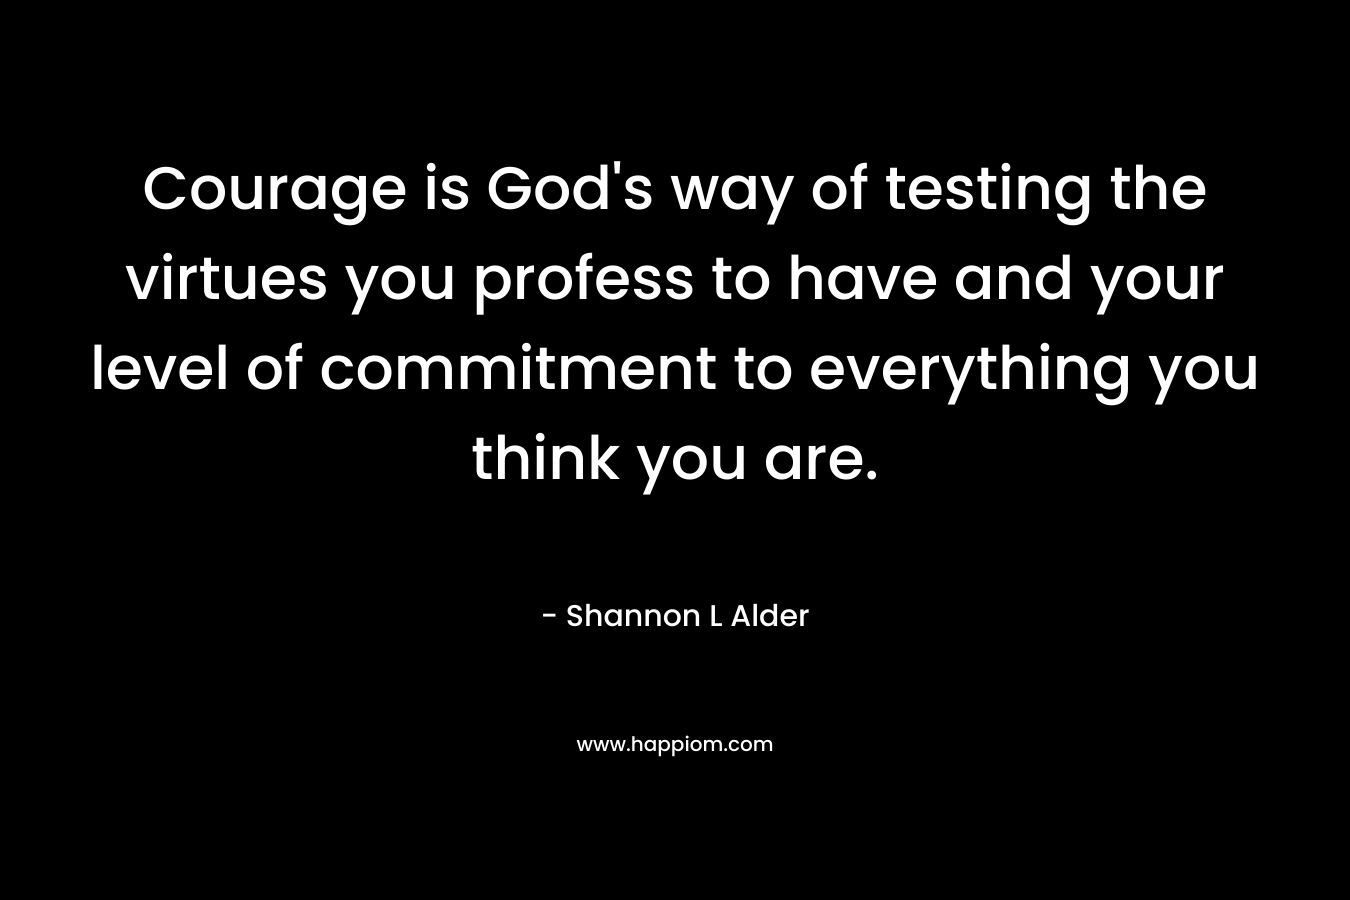 Courage is God's way of testing the virtues you profess to have and your level of commitment to everything you think you are.